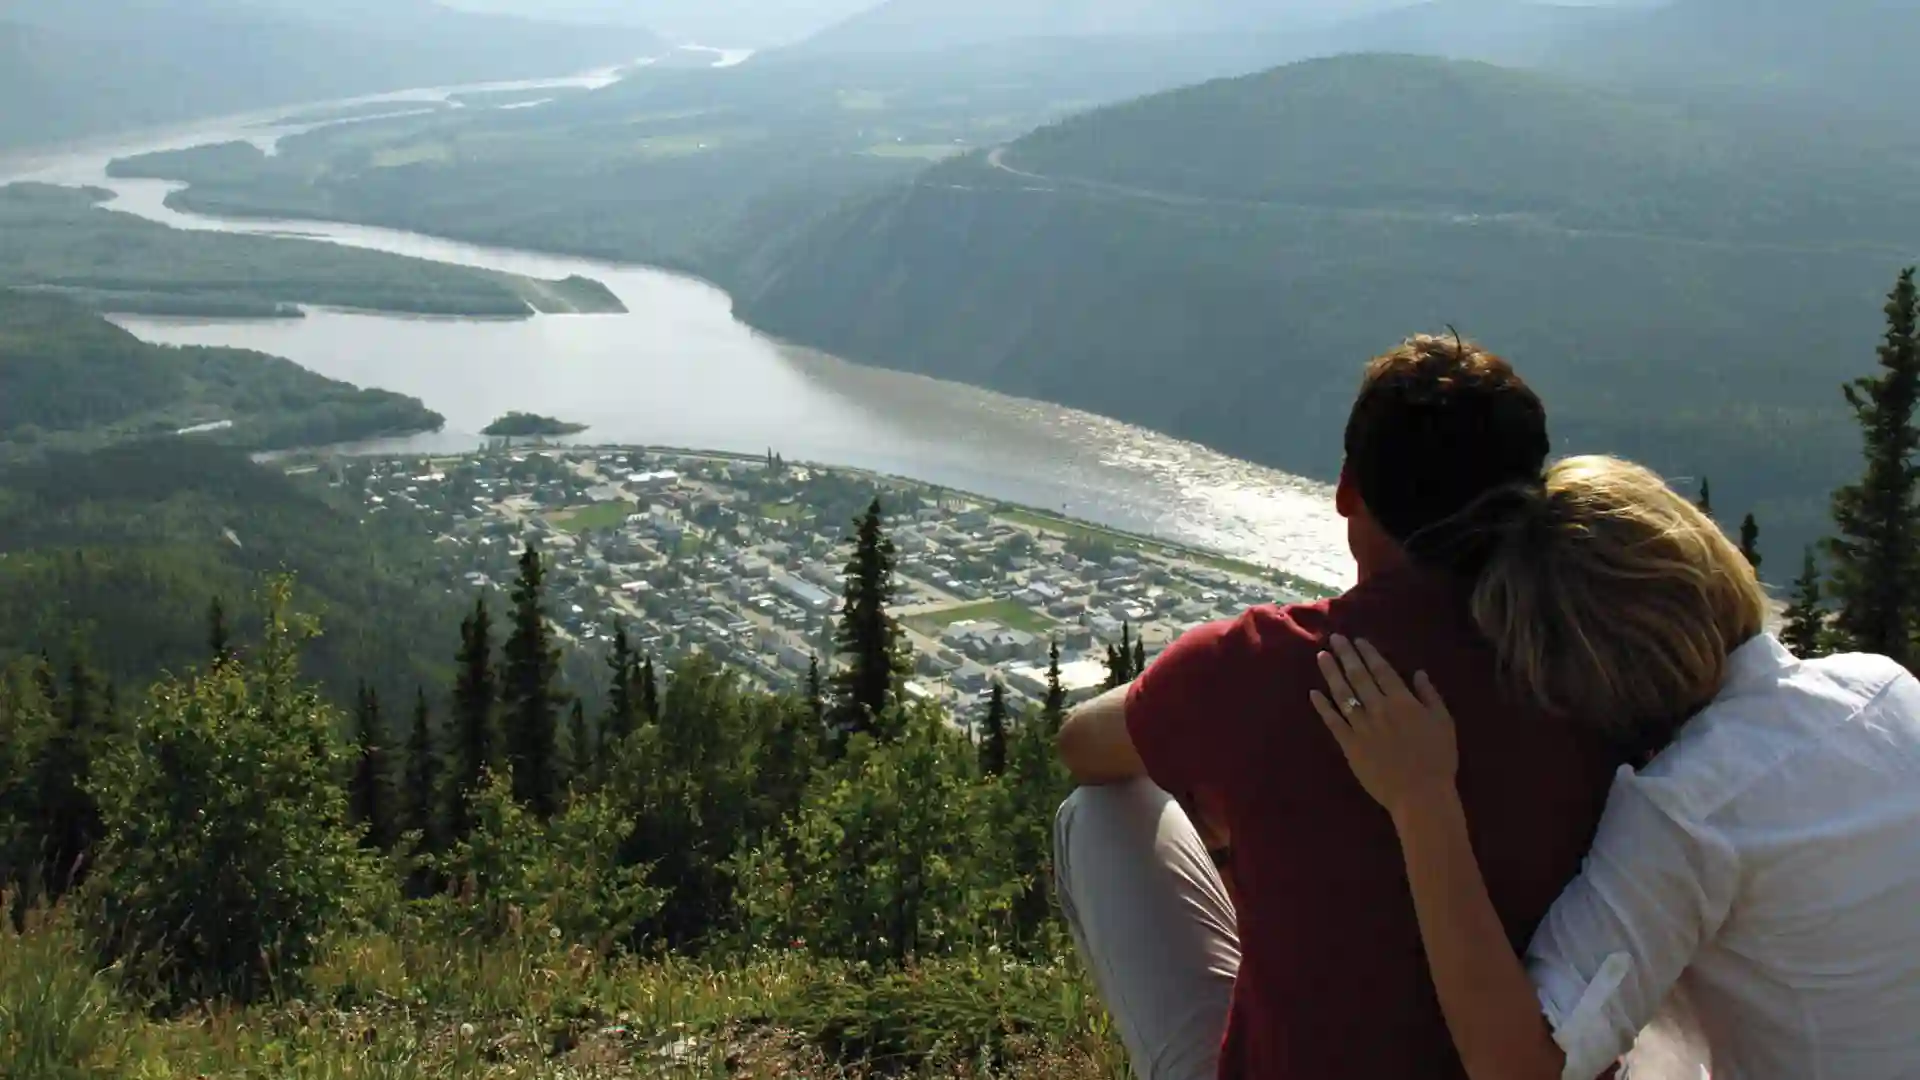 View of people overlooking valley in Canada from hillside.